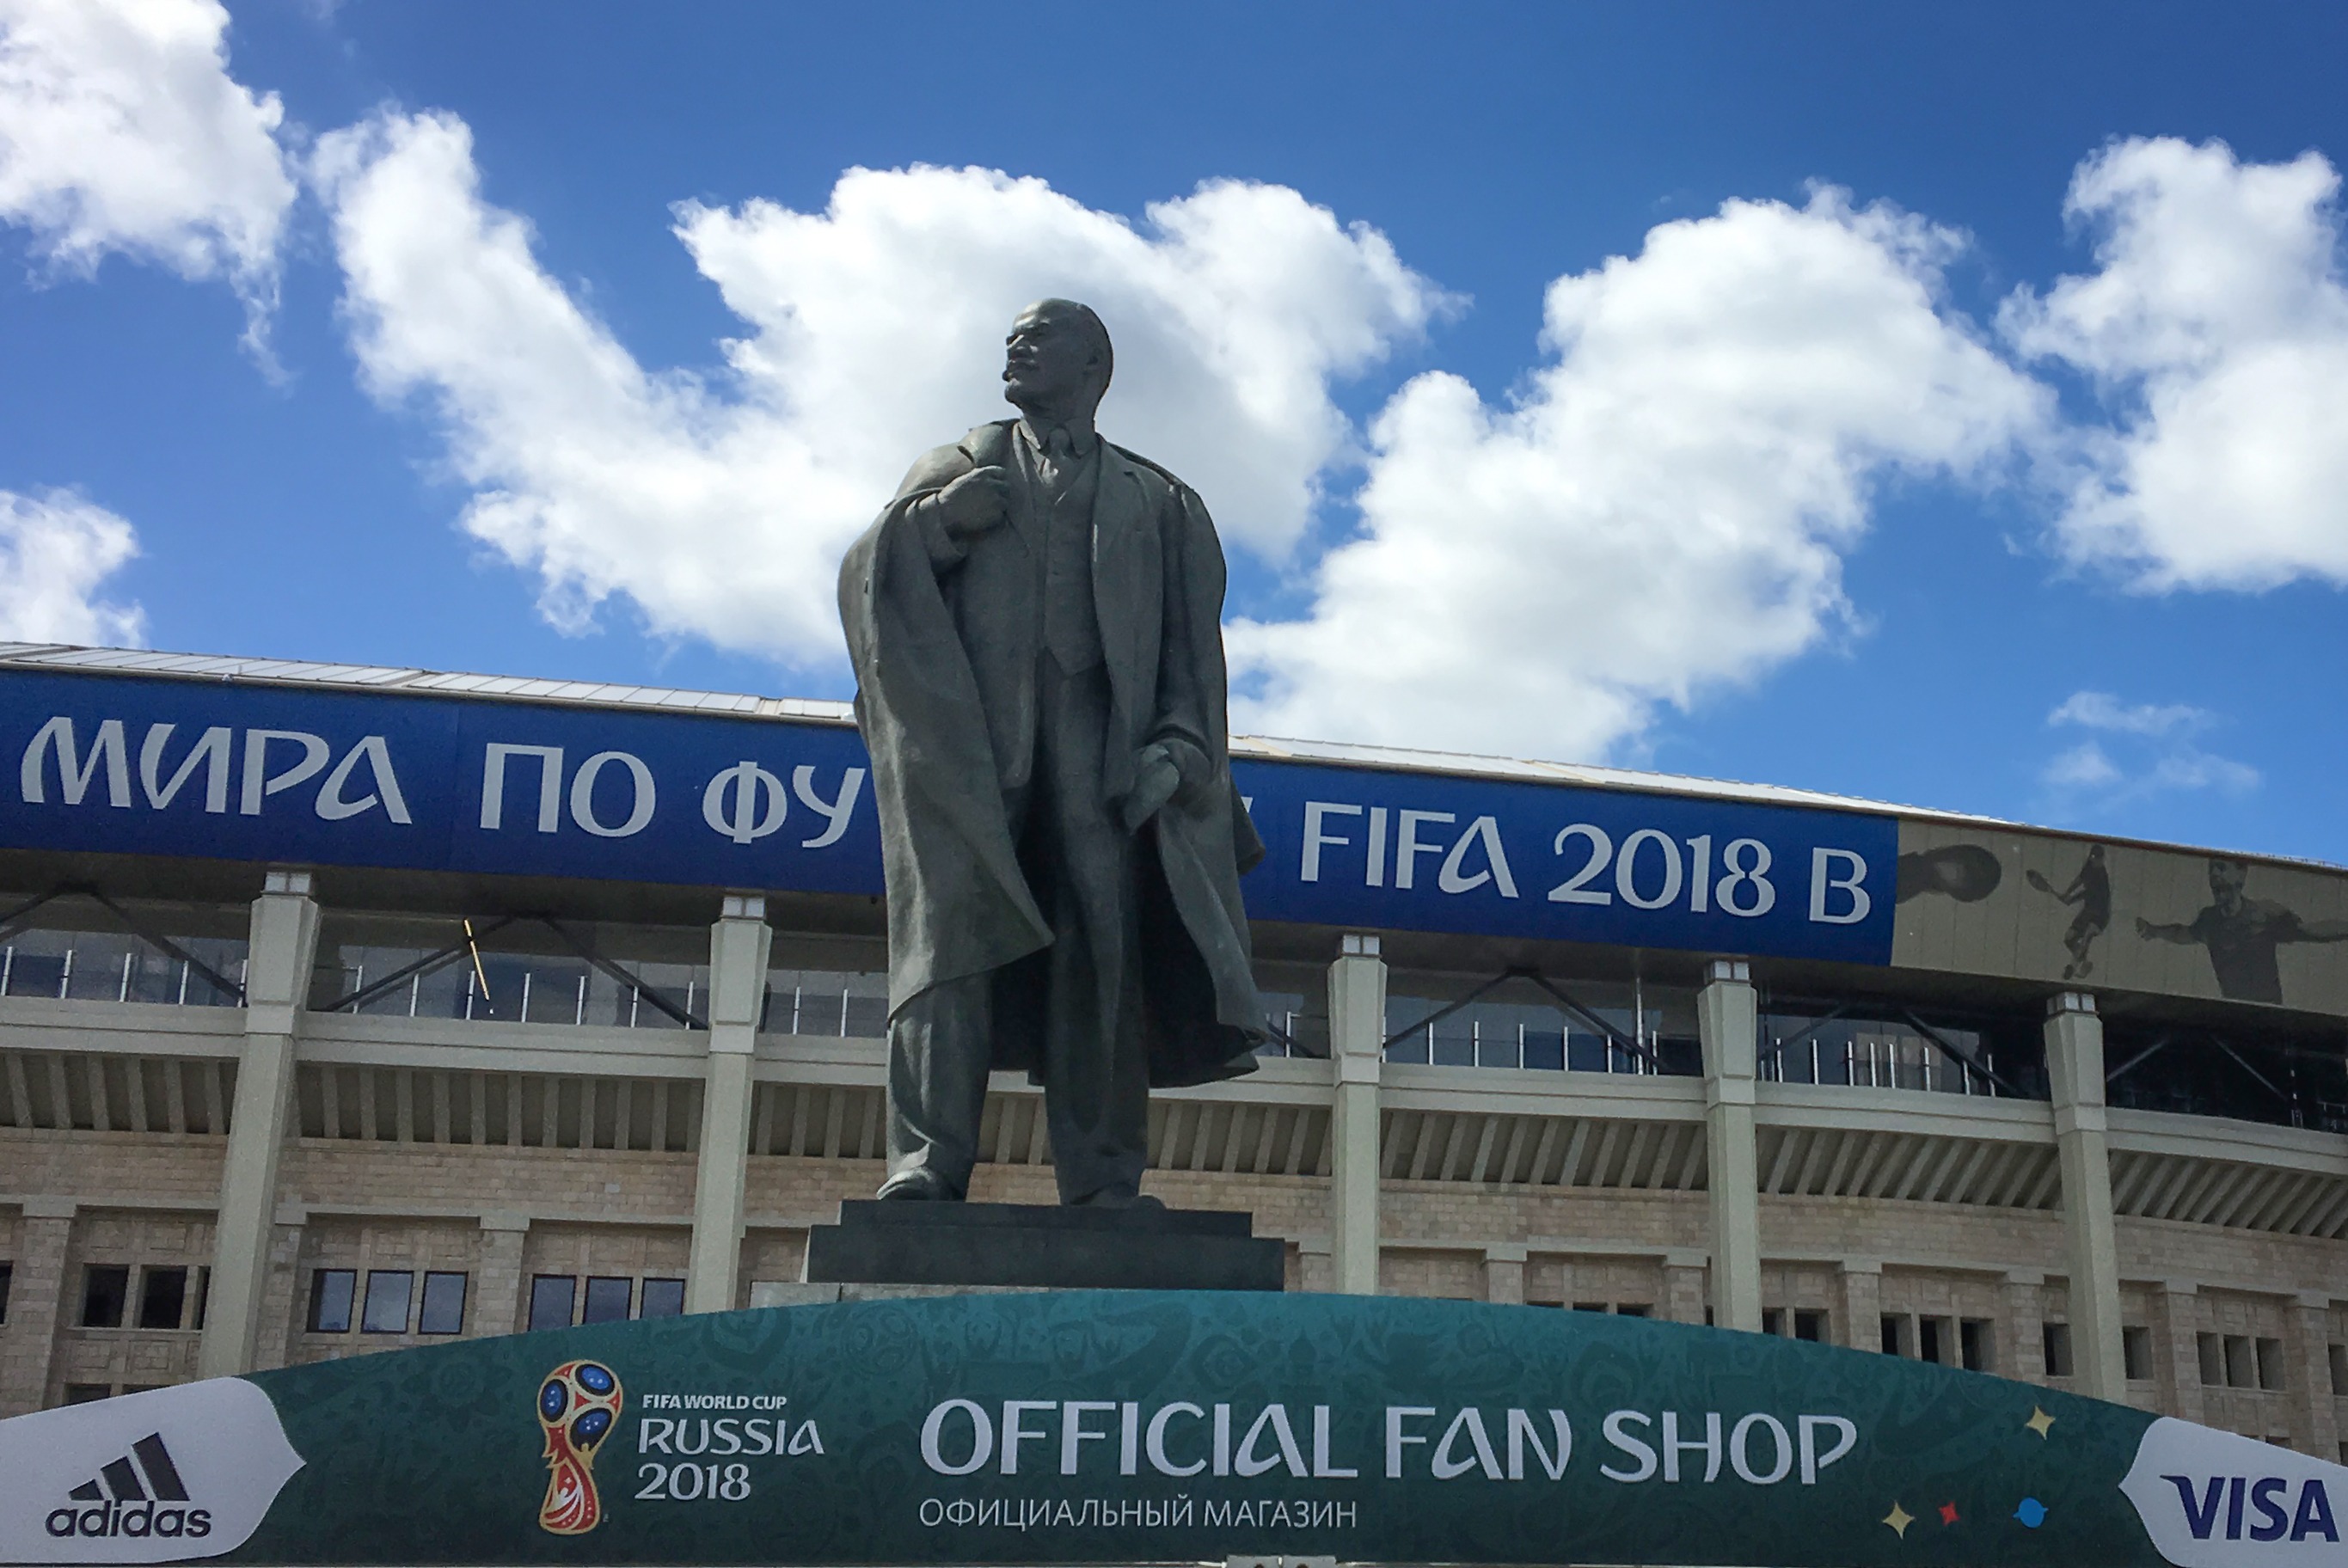 A picture taken on June 1, 2018 shows a monument to the Soviet Union founder Vladimir Lenin in front of the 80,000-seater Luzhniki Stadium as final preparations are under way for the 2018 FIFA World Cup football tournament, Moscow. (Photo by Mladen ANTONOV / AFP)        (Photo credit should read MLADEN ANTONOV/AFP/Getty Images)